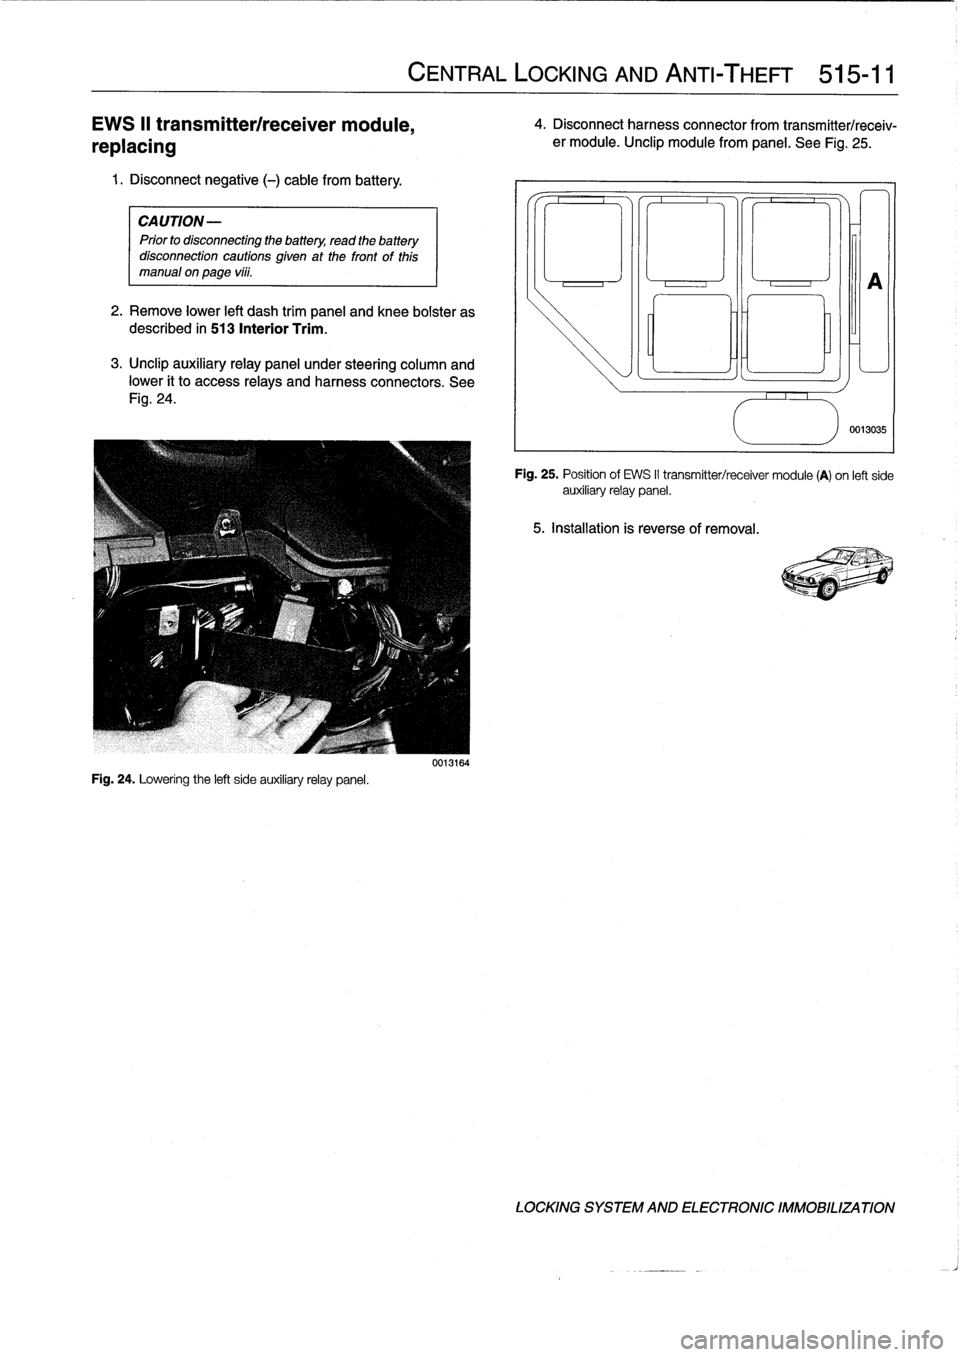 BMW 318i 1997 E36 Workshop Manual 
EWS
II
transmitterlreceiver
module,

replacing

1
.
Disconnect
negative
(-)
cable
from
battery
.

CAUTION-

Prior
to
disconnectiog
the
battery,
read
the
battery
disconnection
cautions
given
at
the
fr